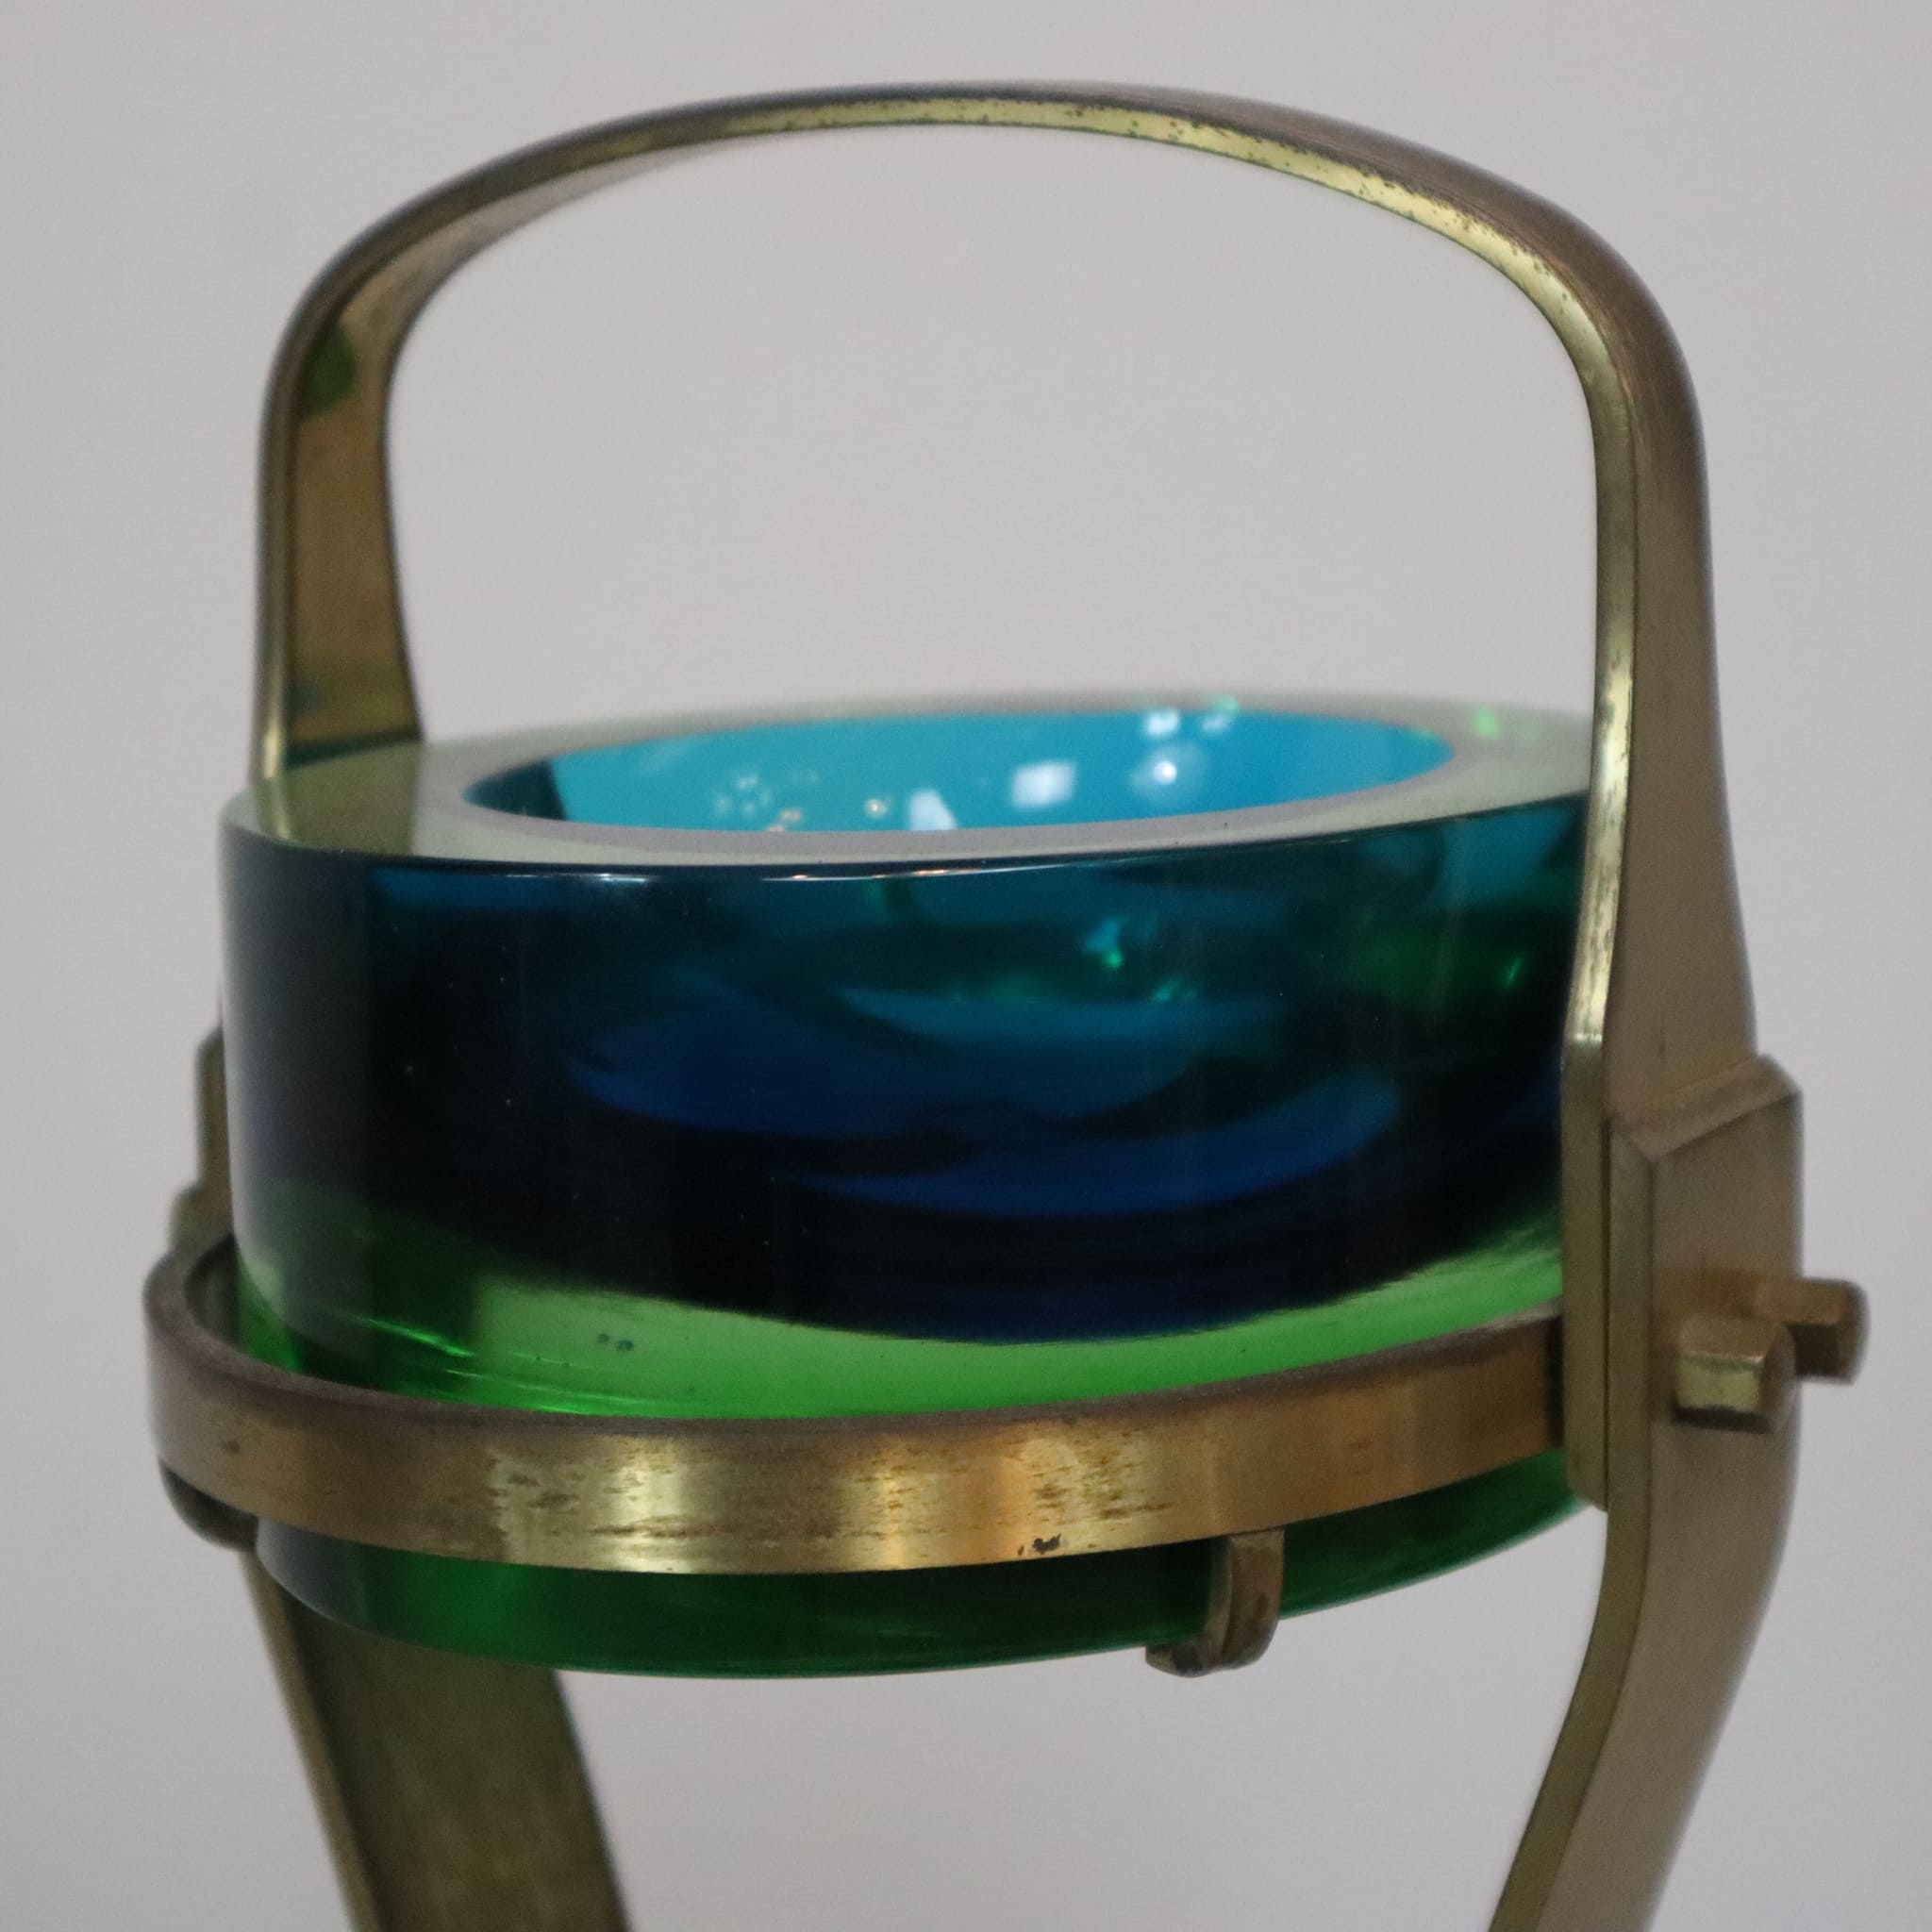 visionidepoca-modern-art-ashtray-entrance-vintage-60s-70s-brass-structure-base-in-murano-glass-green-and-blue-glass-detail-and-colouring-depth